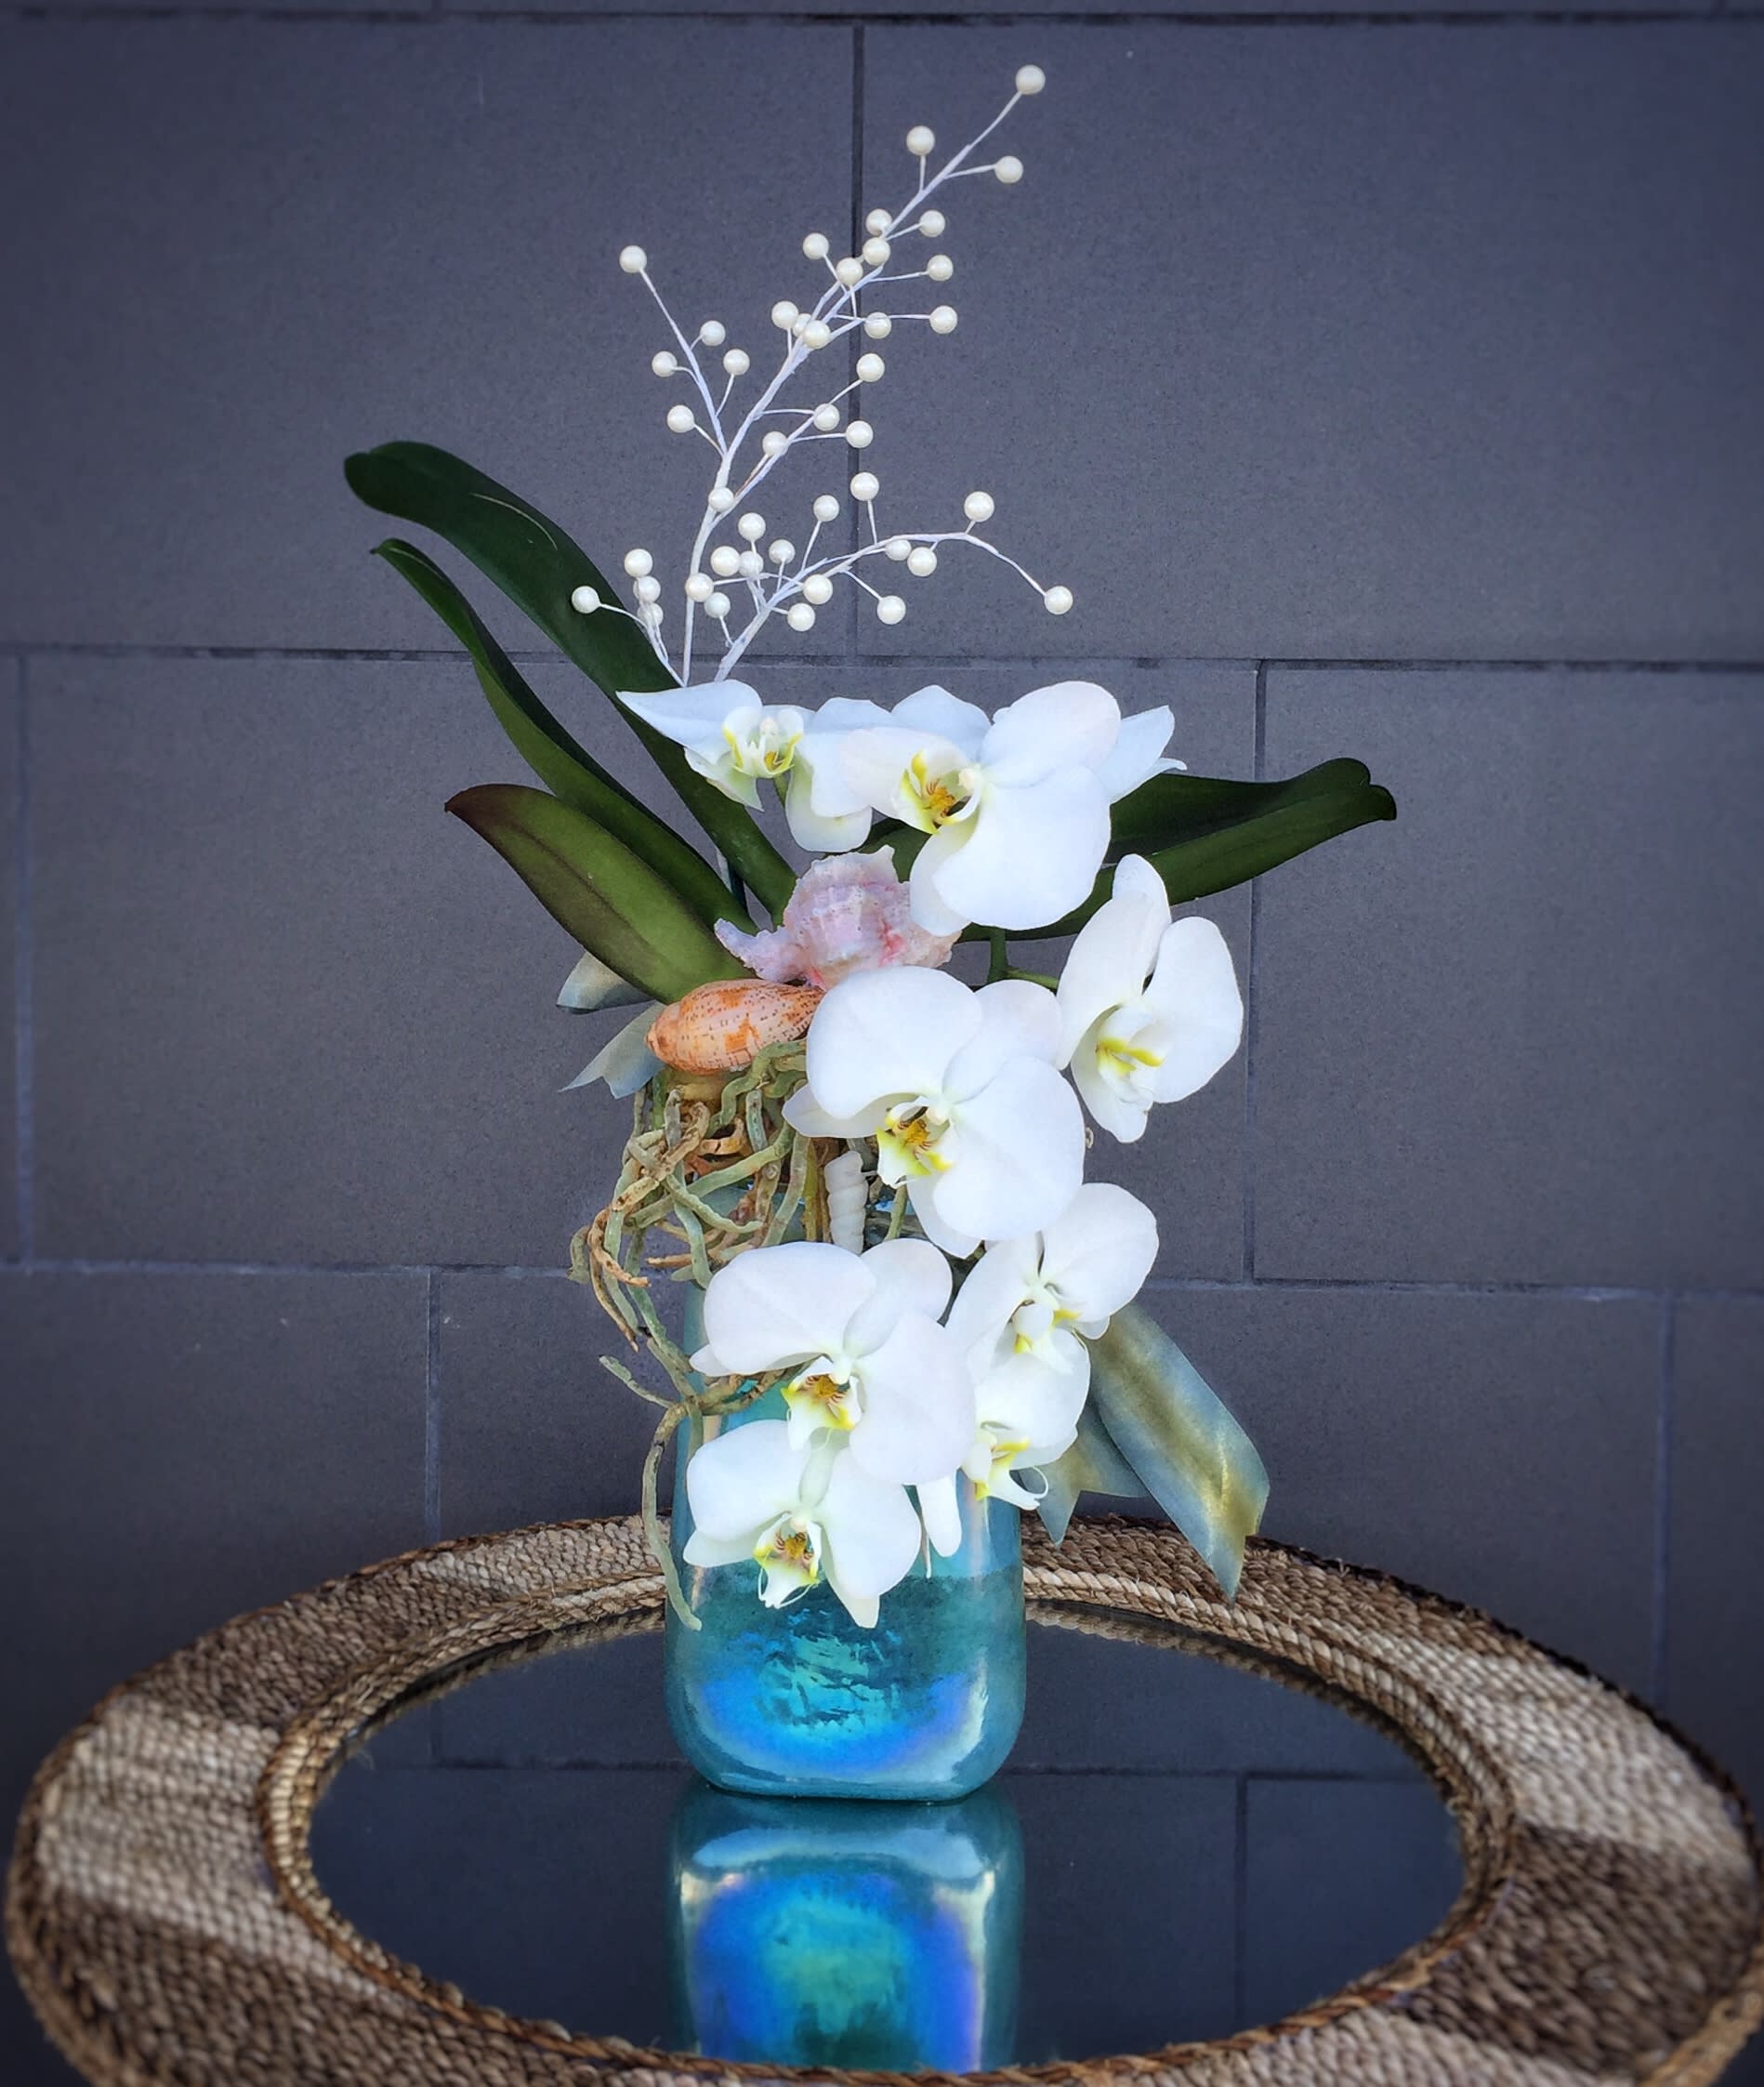 Jumping Dolphin - Oceanic design including orchids, pearls and sea shells in a nice aqua vase STANDARD: FIRST PHOTO DELUXE: SECOND PHOTO